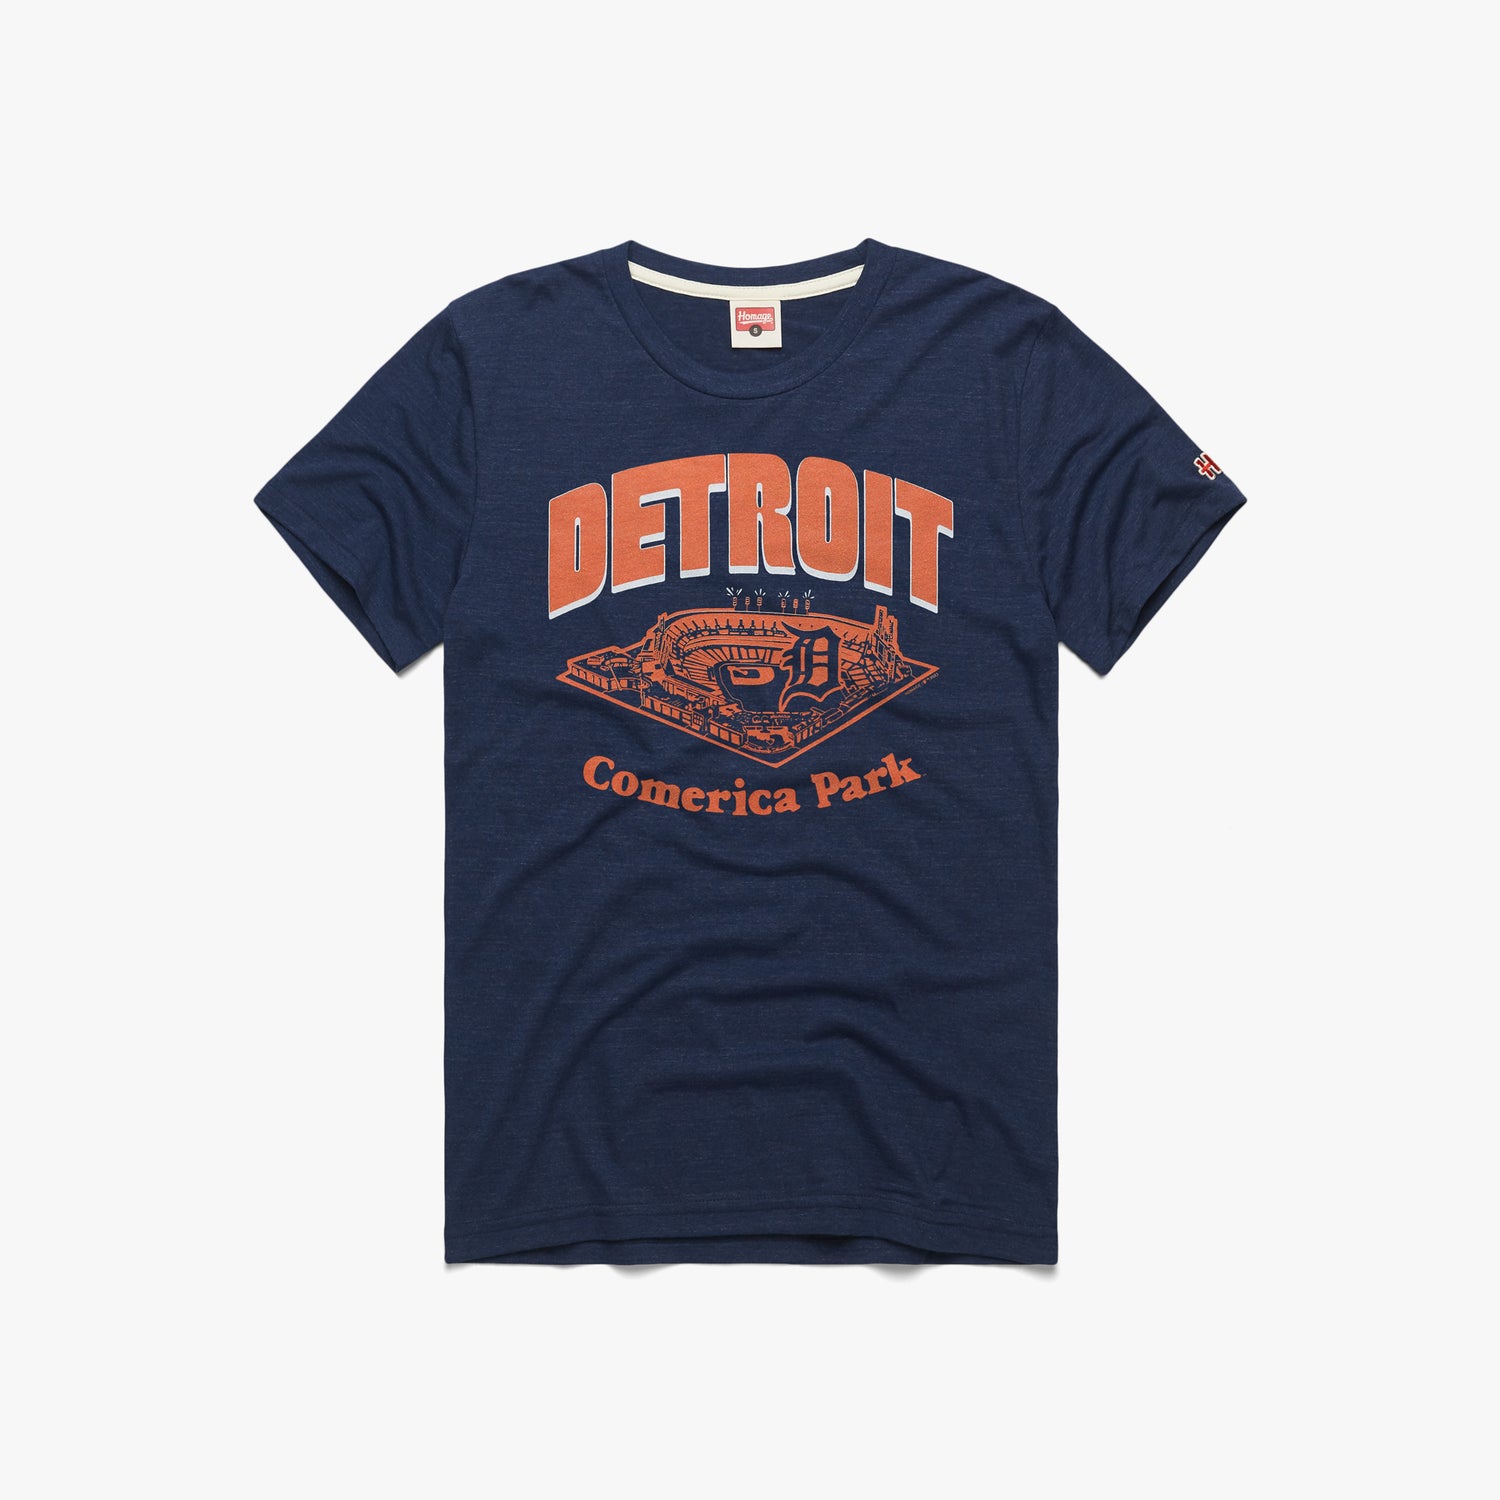 Detroit Tigers Comerica Park T-Shirt from Homage. | Navy | Vintage Apparel from Homage.